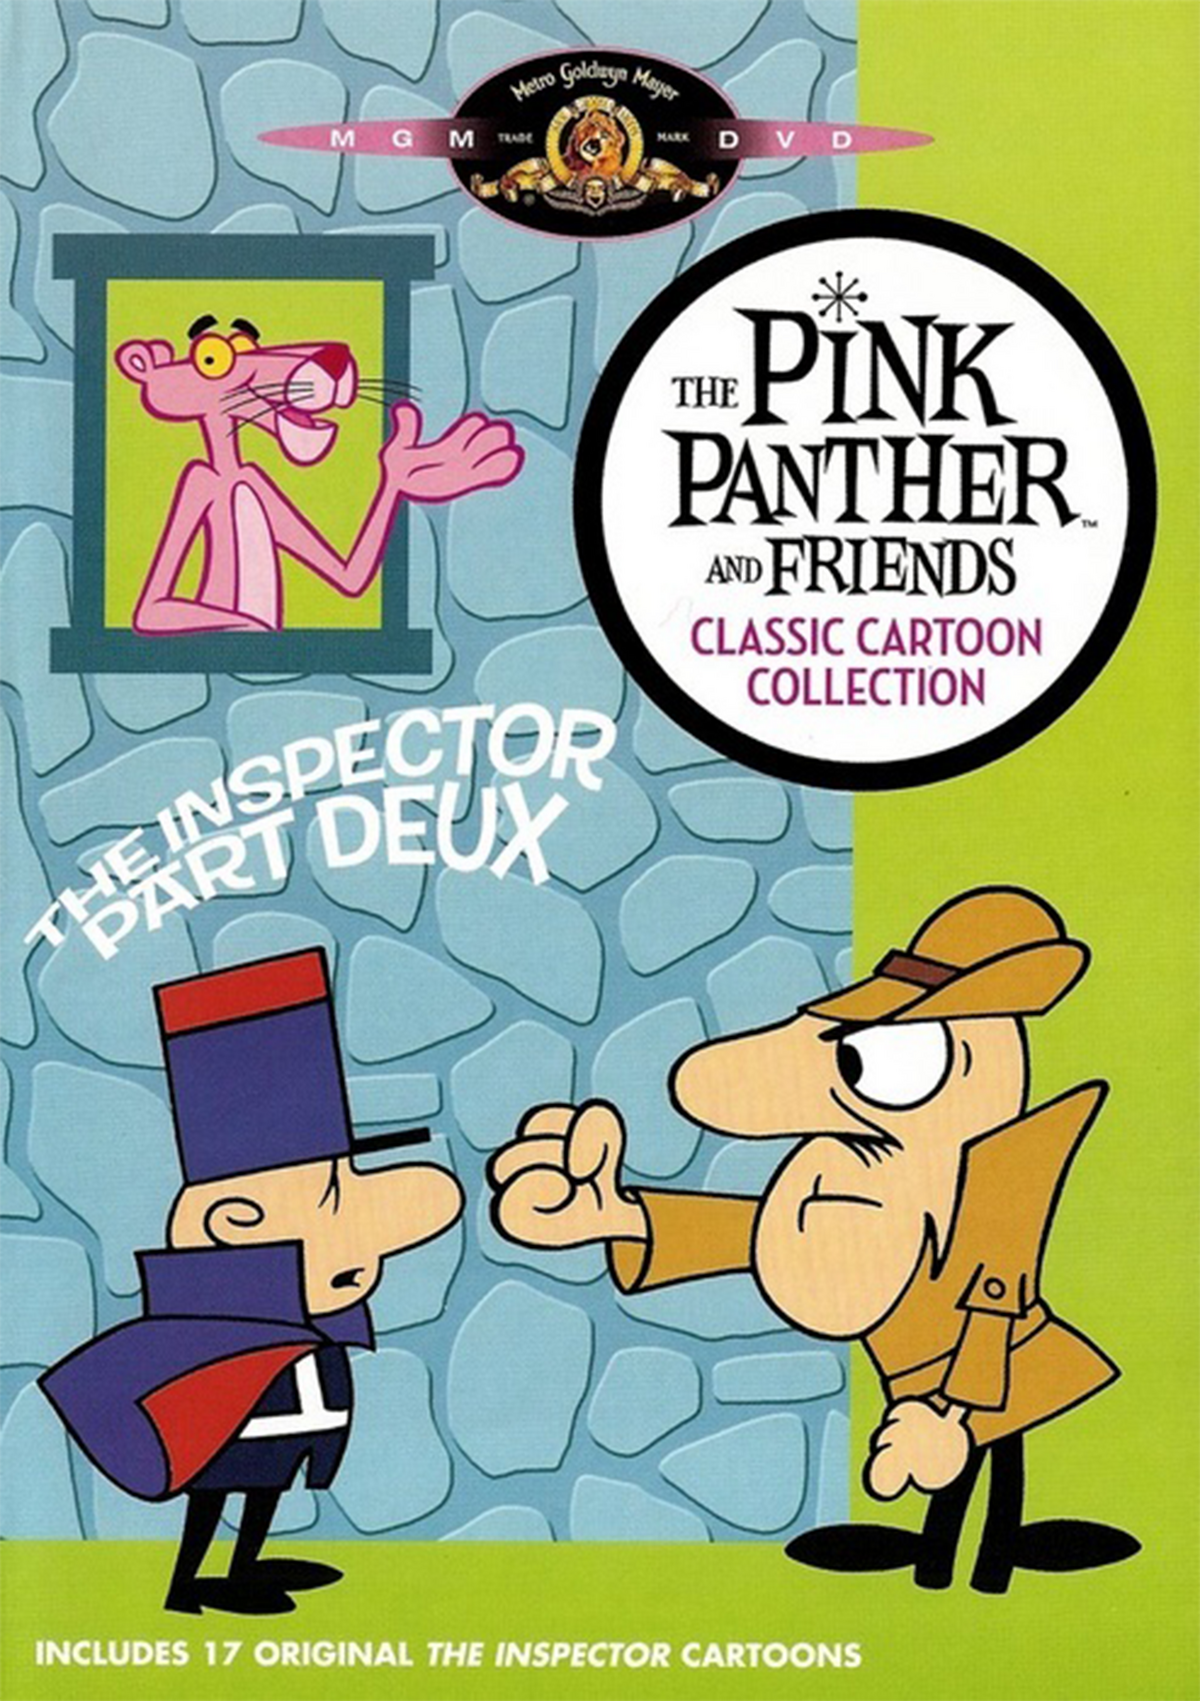 The Pink Panther Classic Cartoon DVDs and Blu-rays